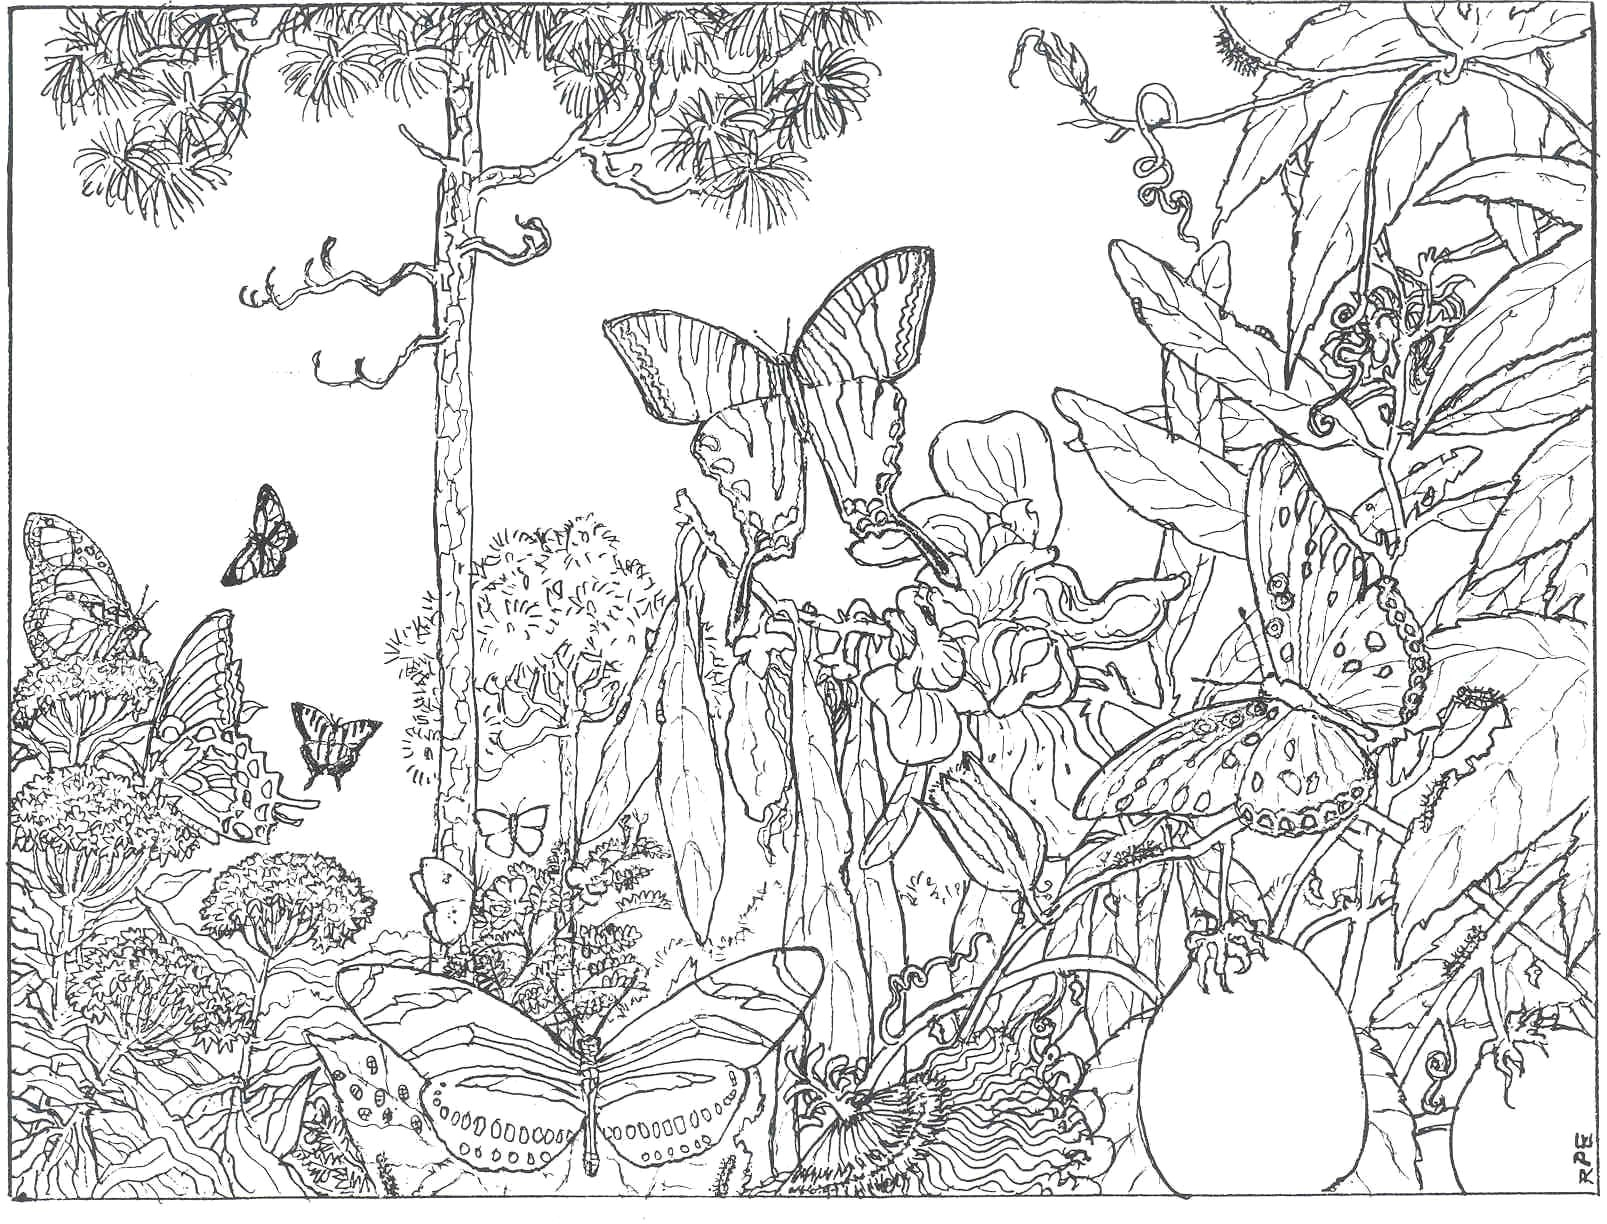 Coloring Ideas : Color Pictures Free Intricate Coloring Pages New - Free Printable Nature Coloring Pages For Adults